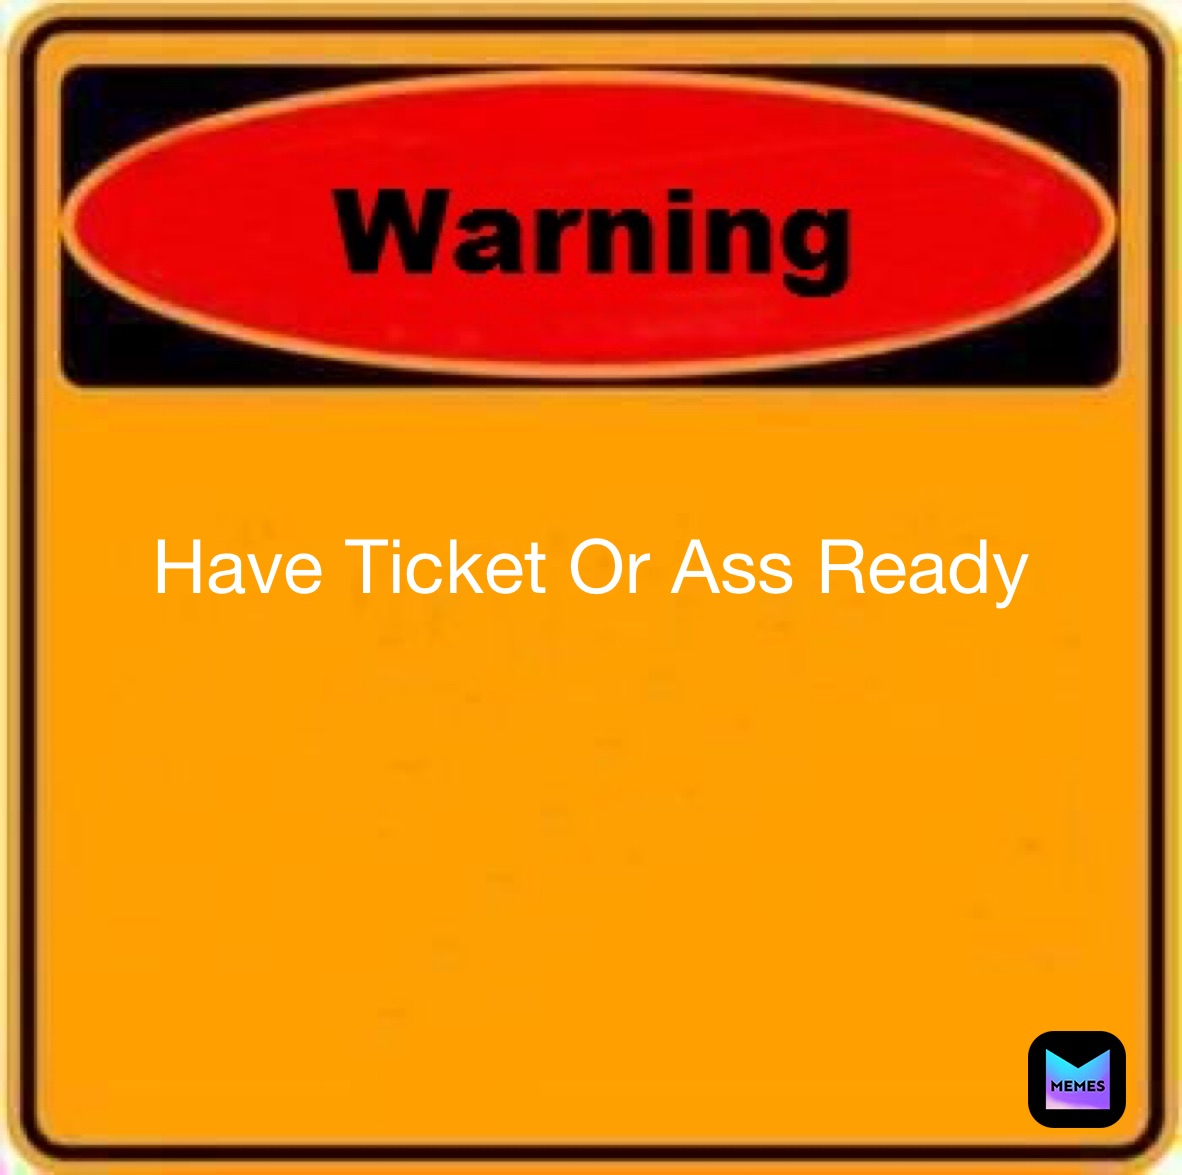 Have Ticket Or Ass Ready